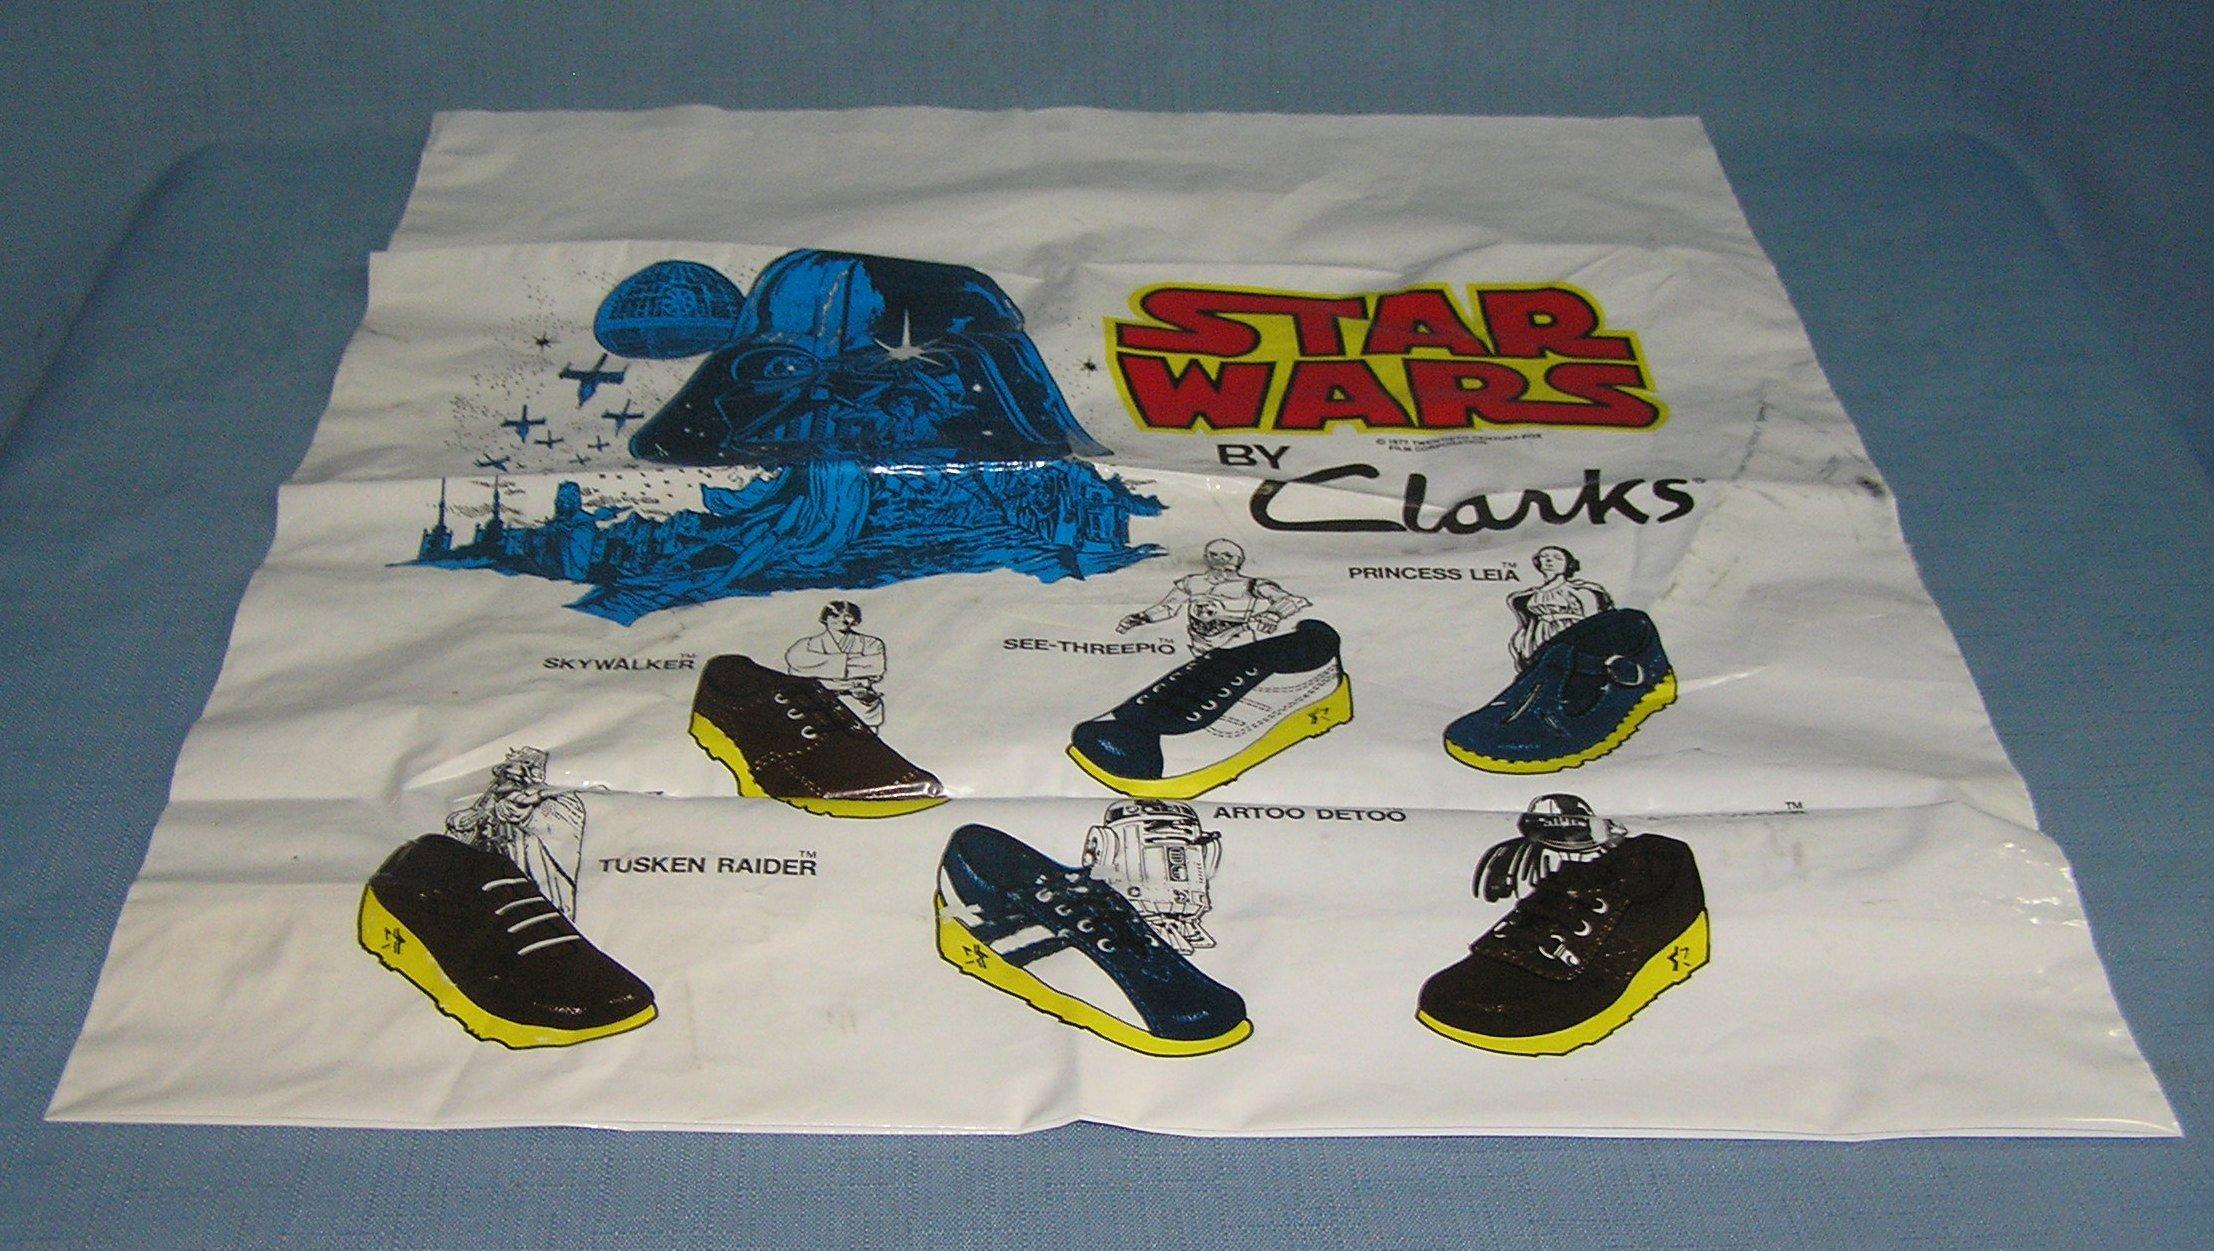 Extremely rare Star Wars sneakers dated 1977